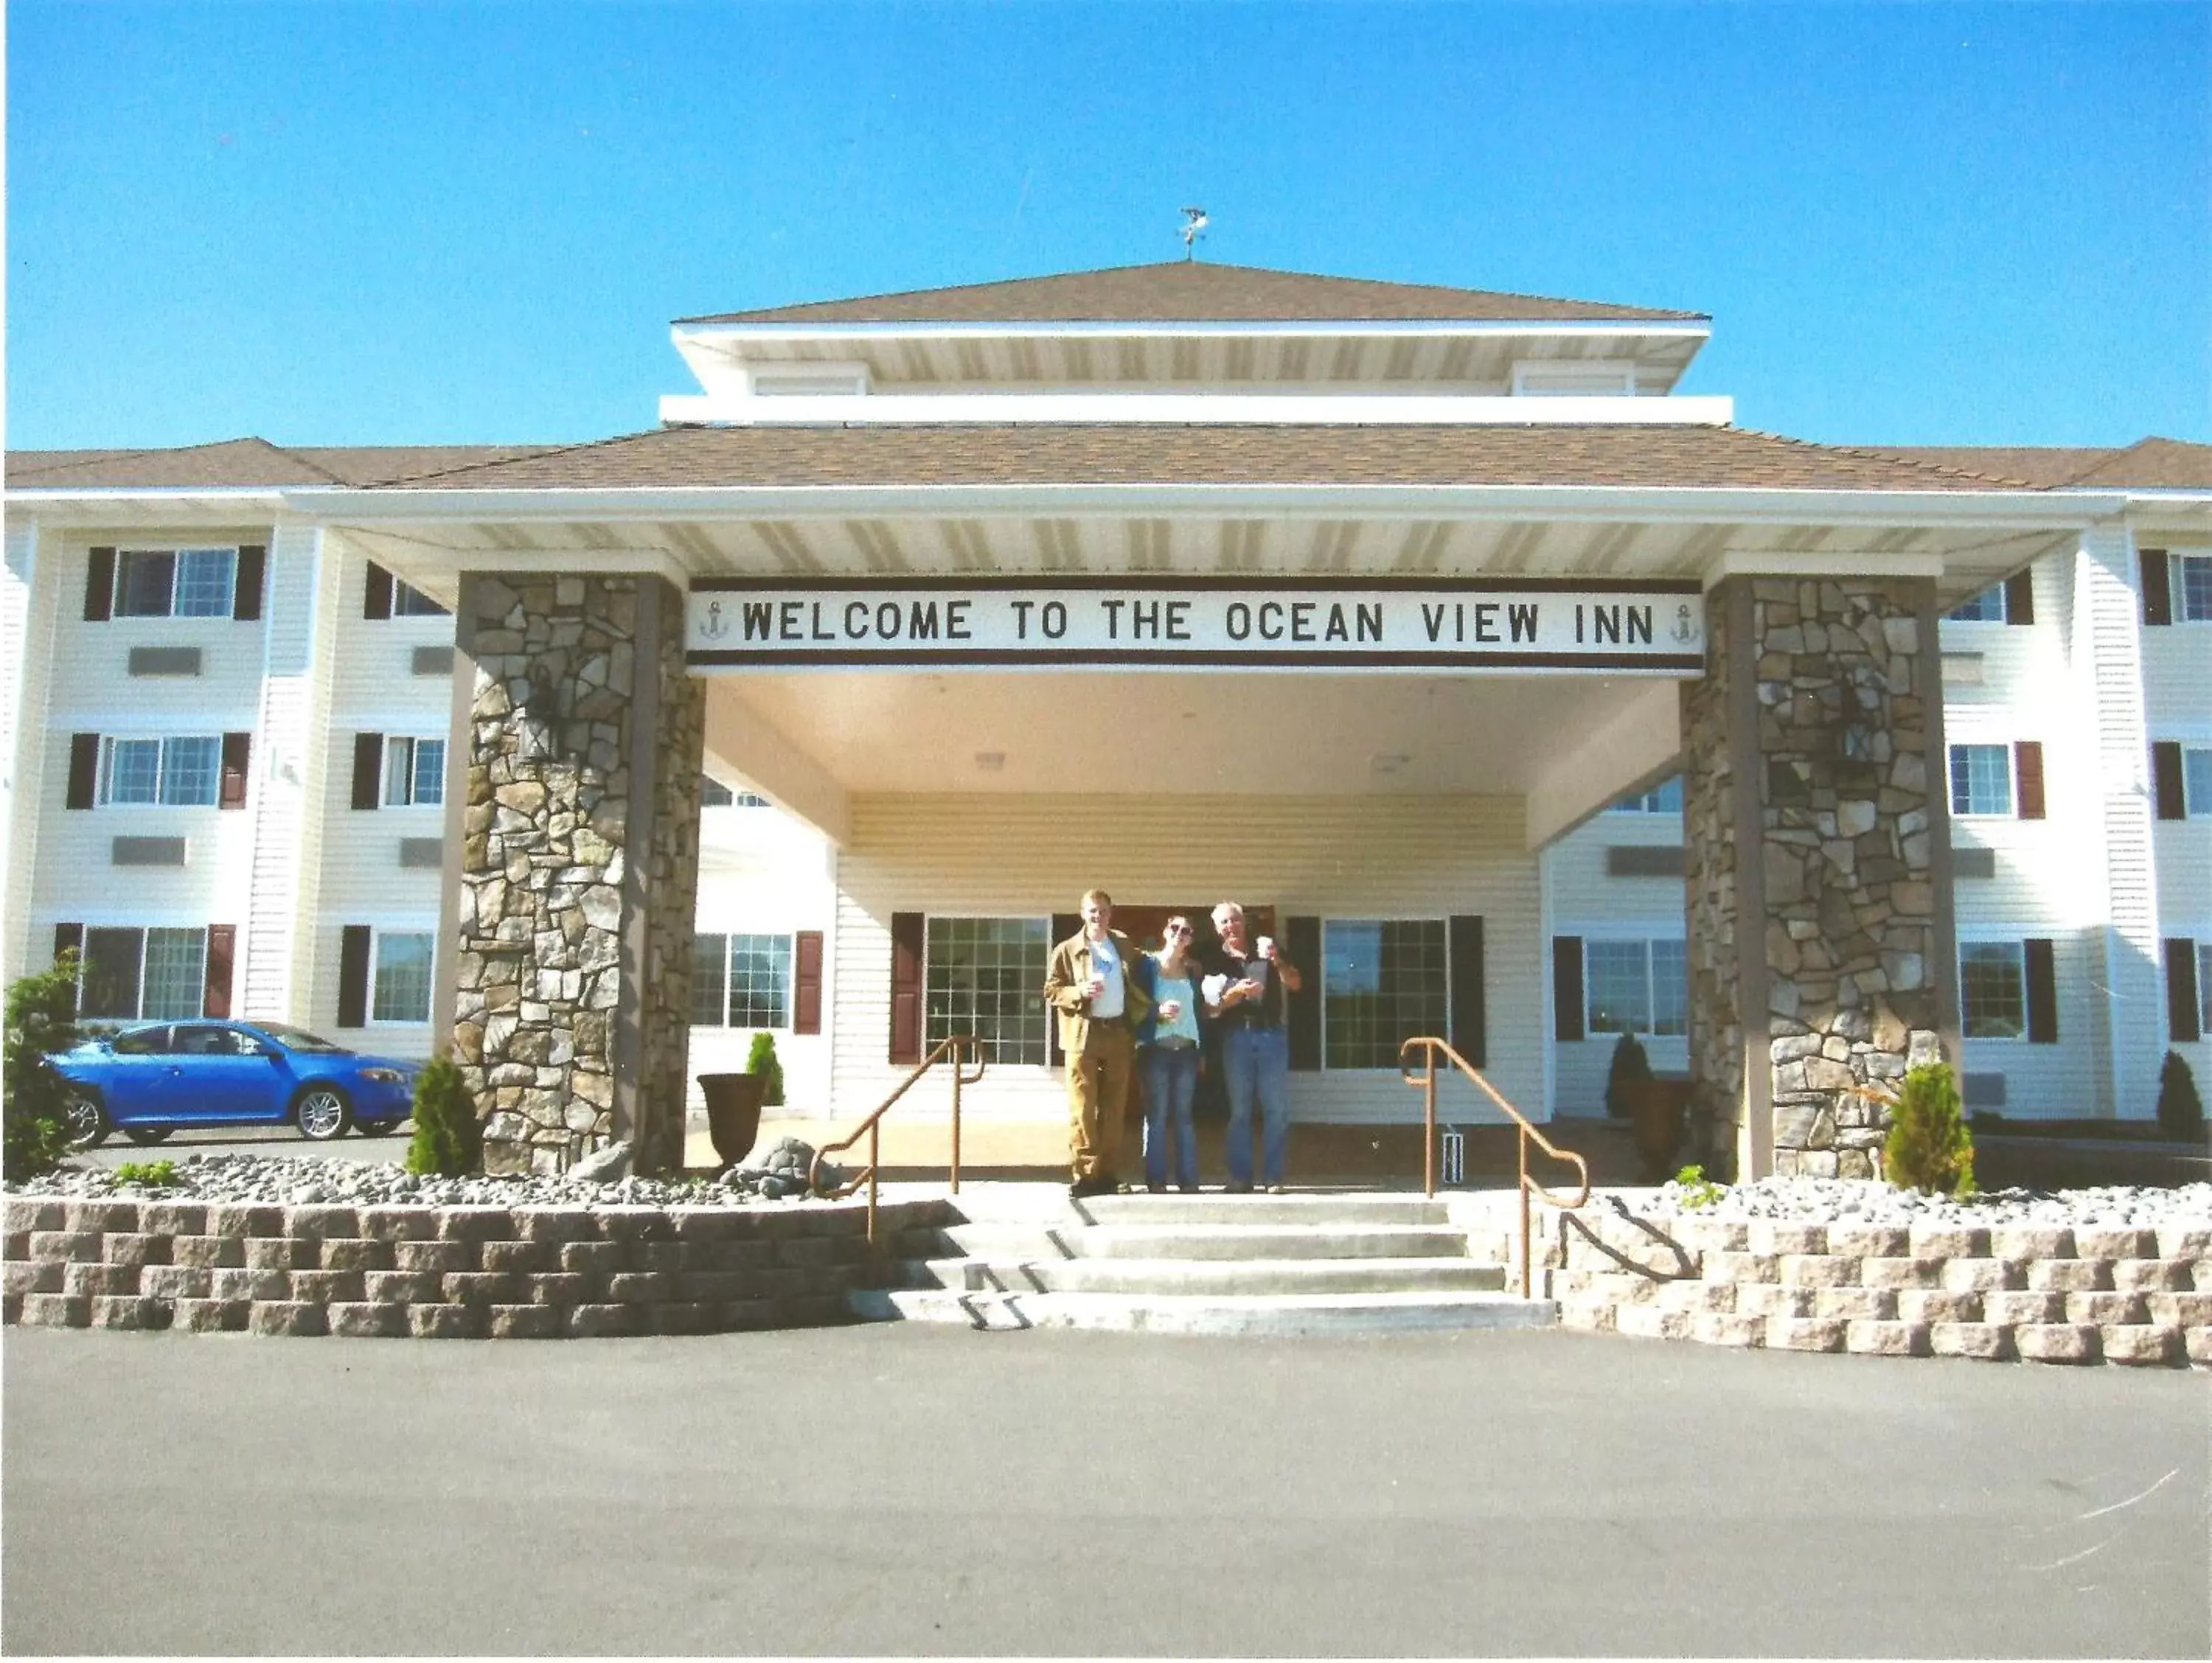 Property building, Facade/Entrance in Oceanview Inn and Suites